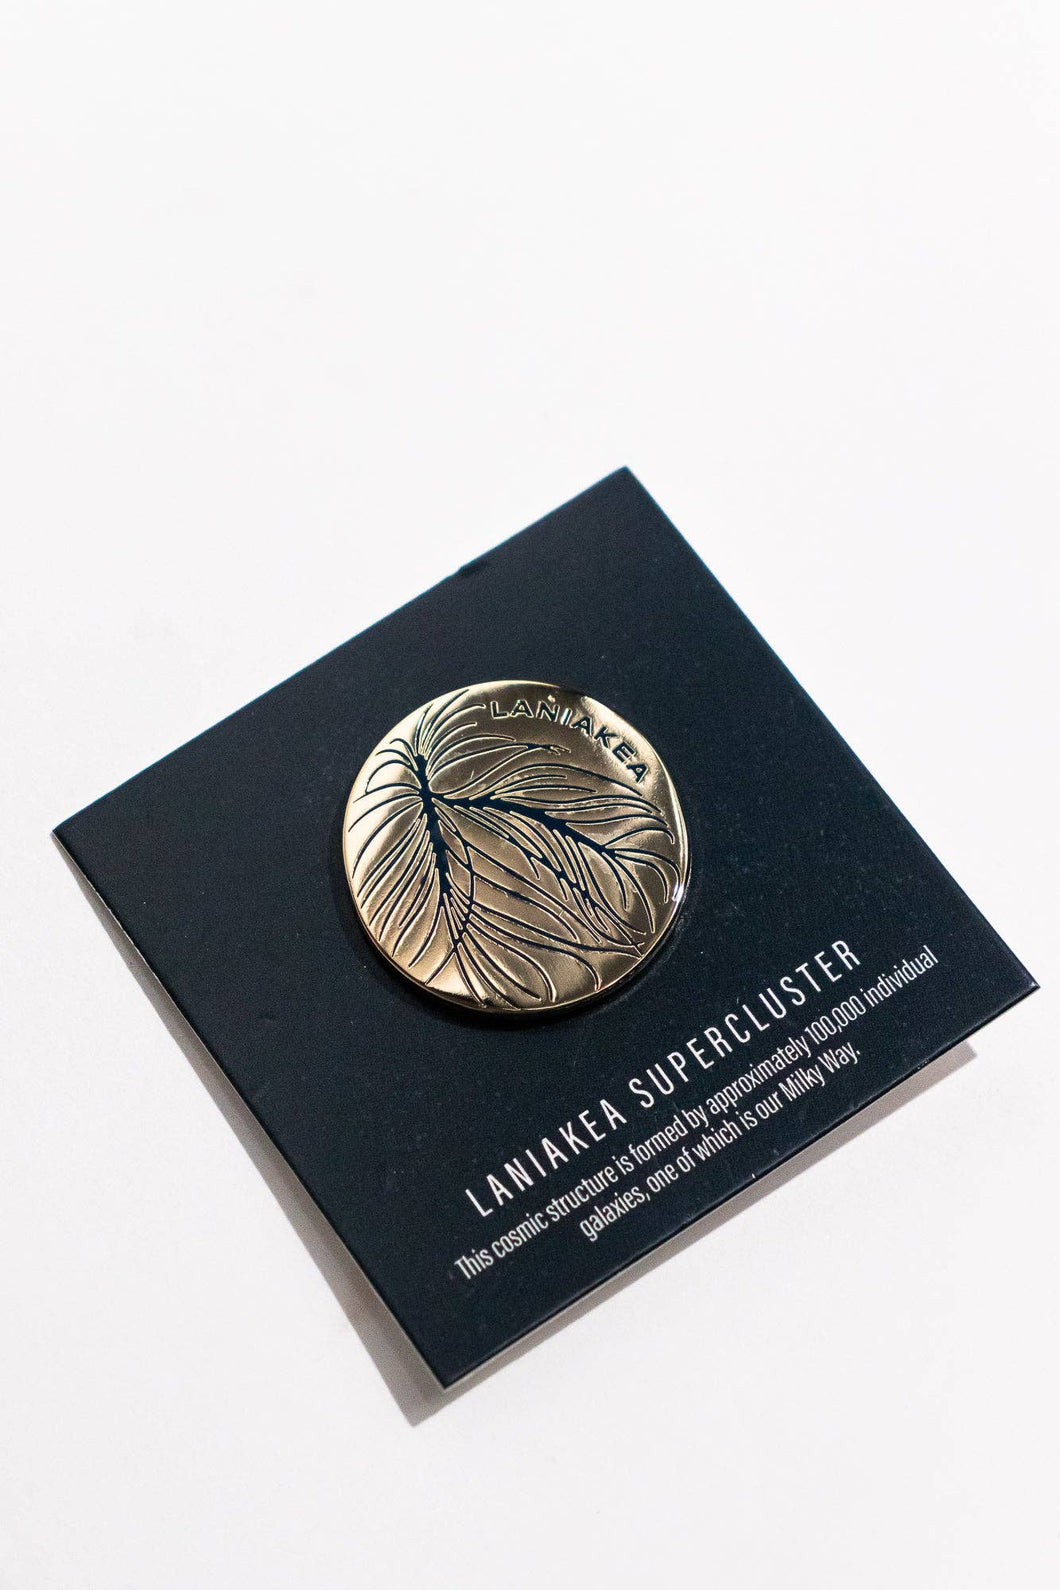 One gold Laniakea Supercluster Pin with two gold butterfly clasps. Diameter: 1.25